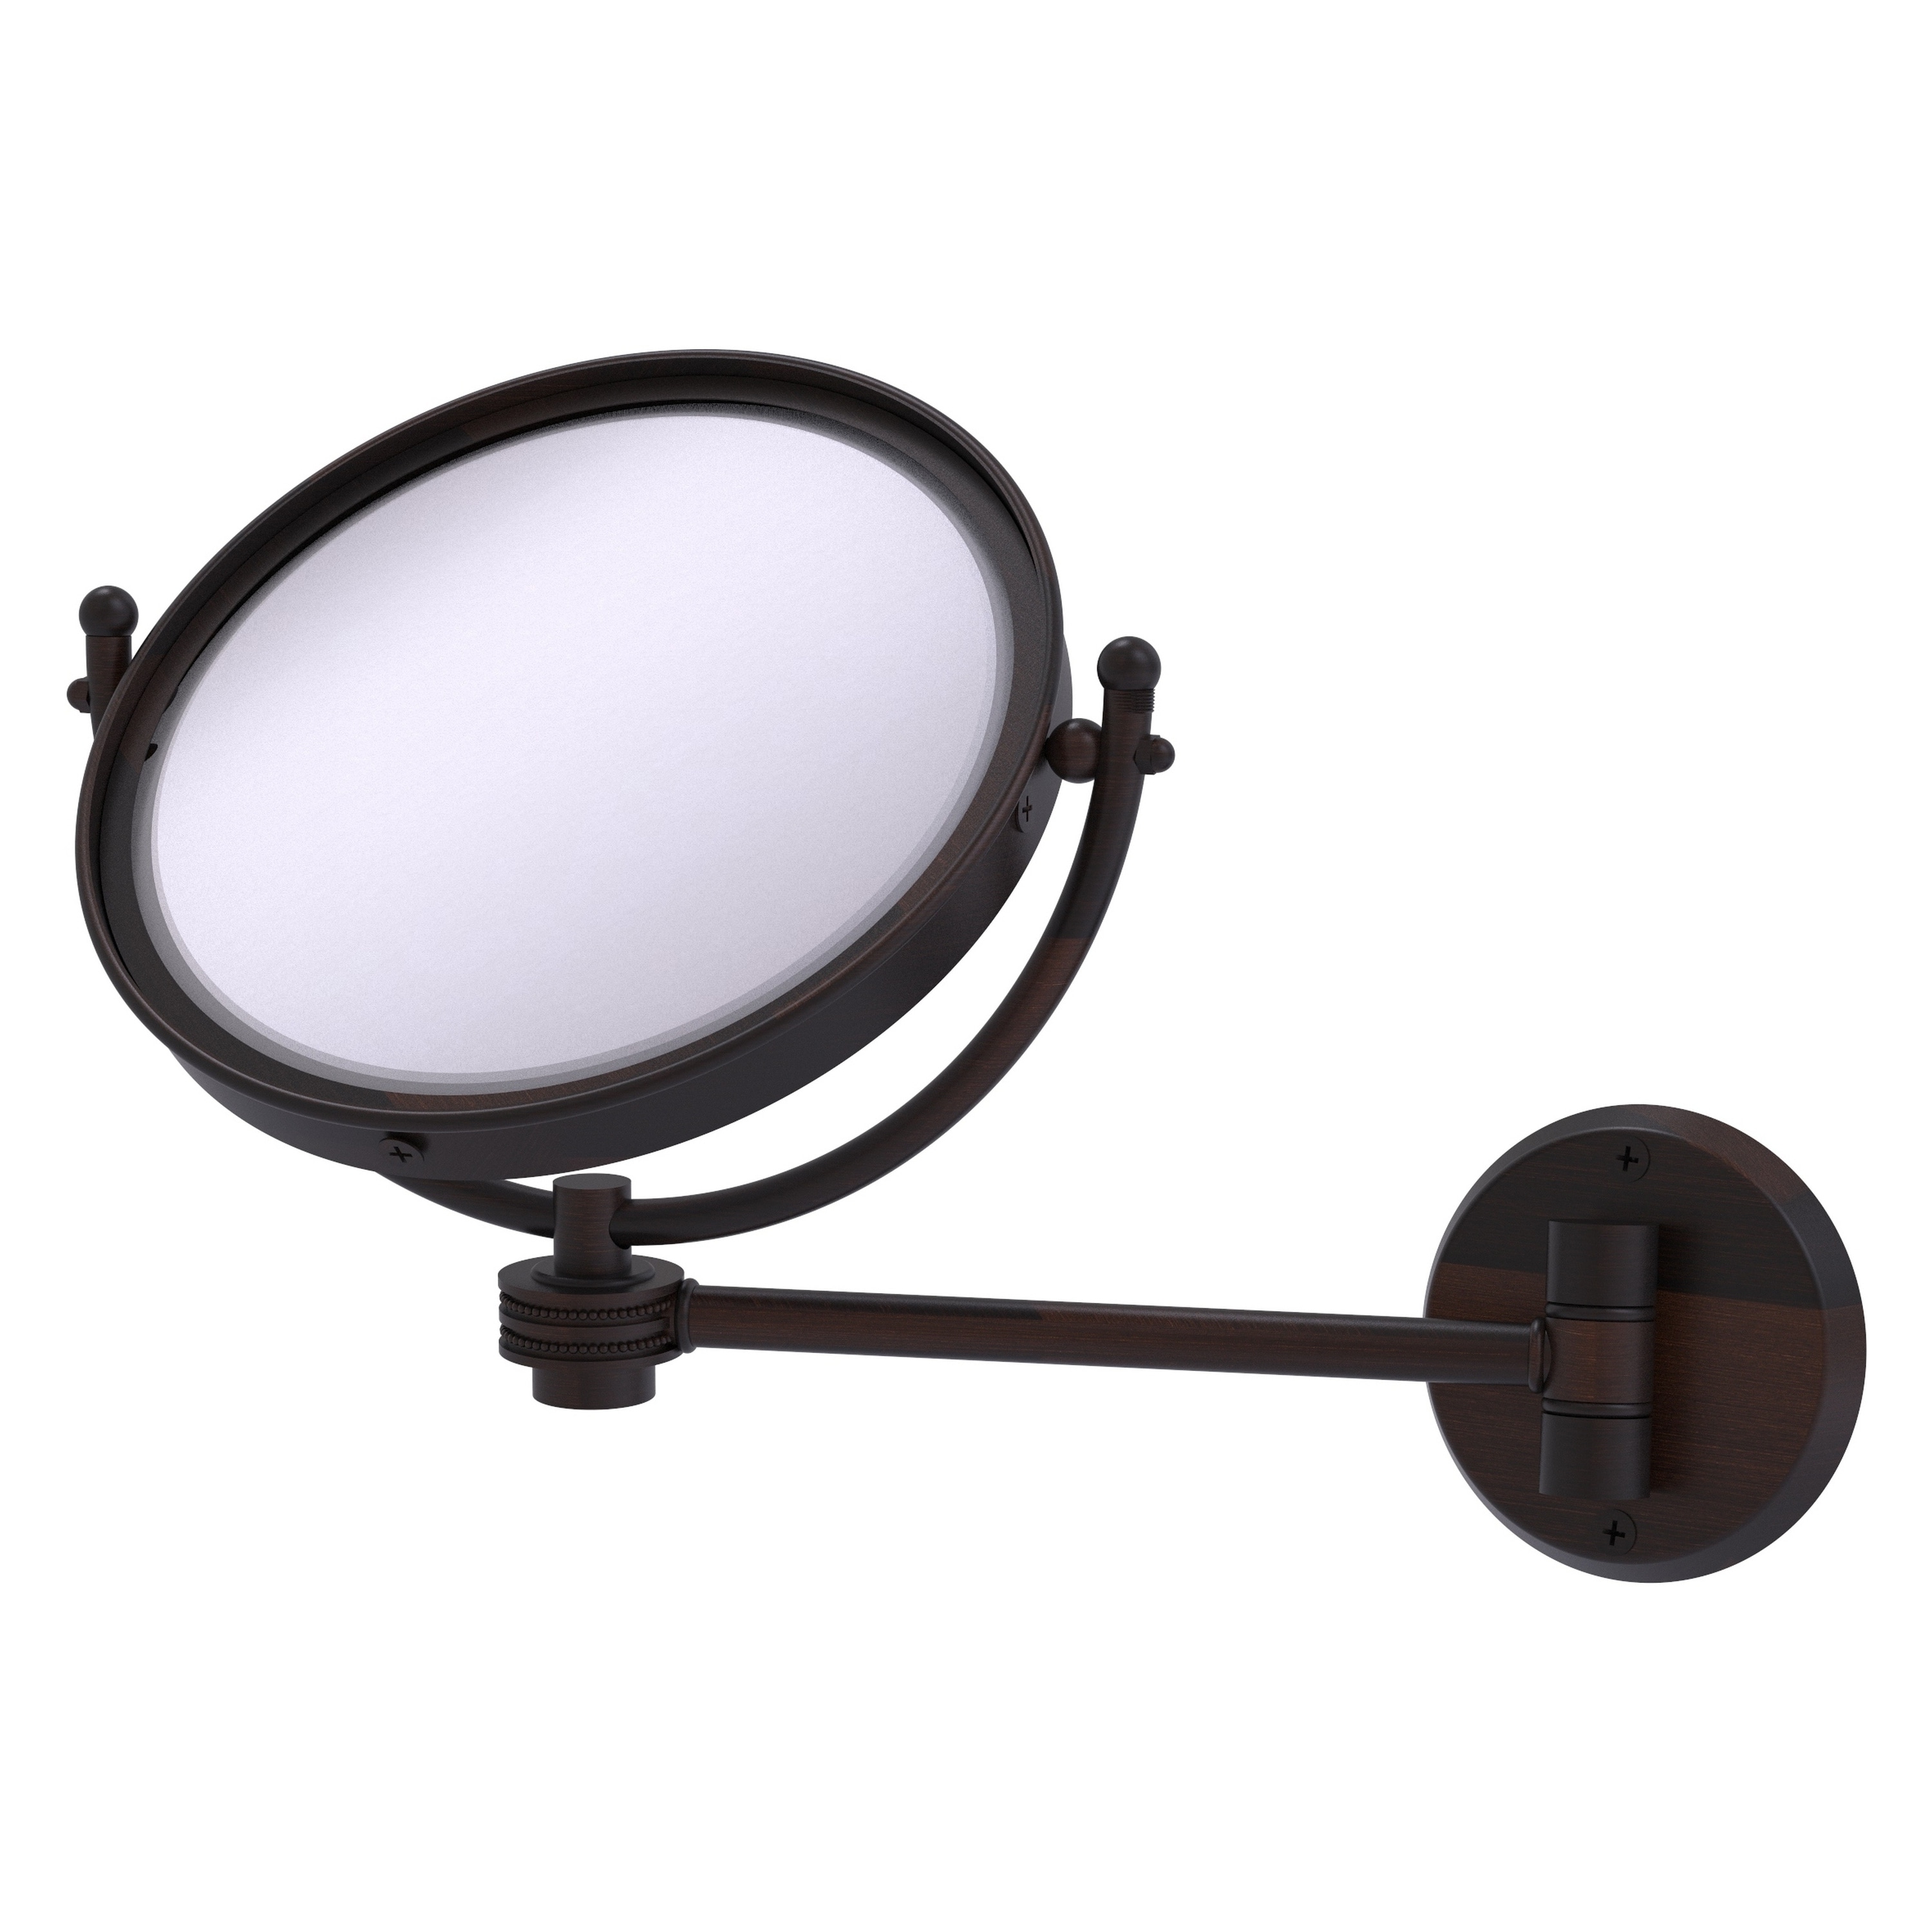 8-in x 10-in Distressed White Double-sided 2X Magnifying Wall-mounted Vanity Mirror | - Allied Brass WM-5T/2X-VB